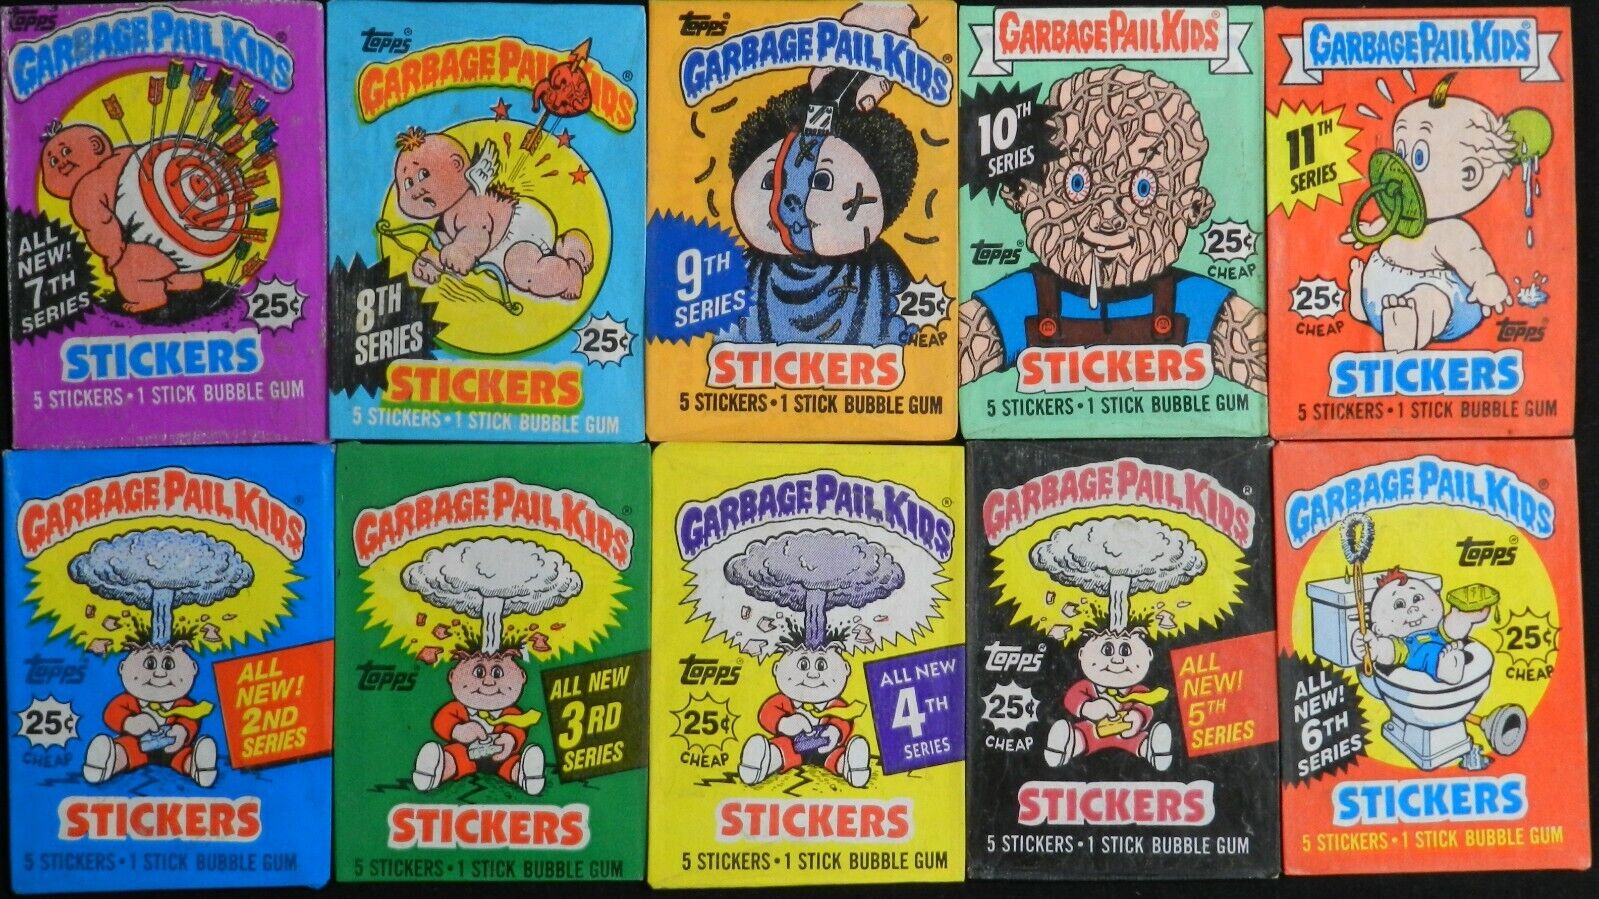 Garbage Pail Kids GPK Series 2nd-11th 1980\'s Wax Wrappers (No Cards) Lot of 10